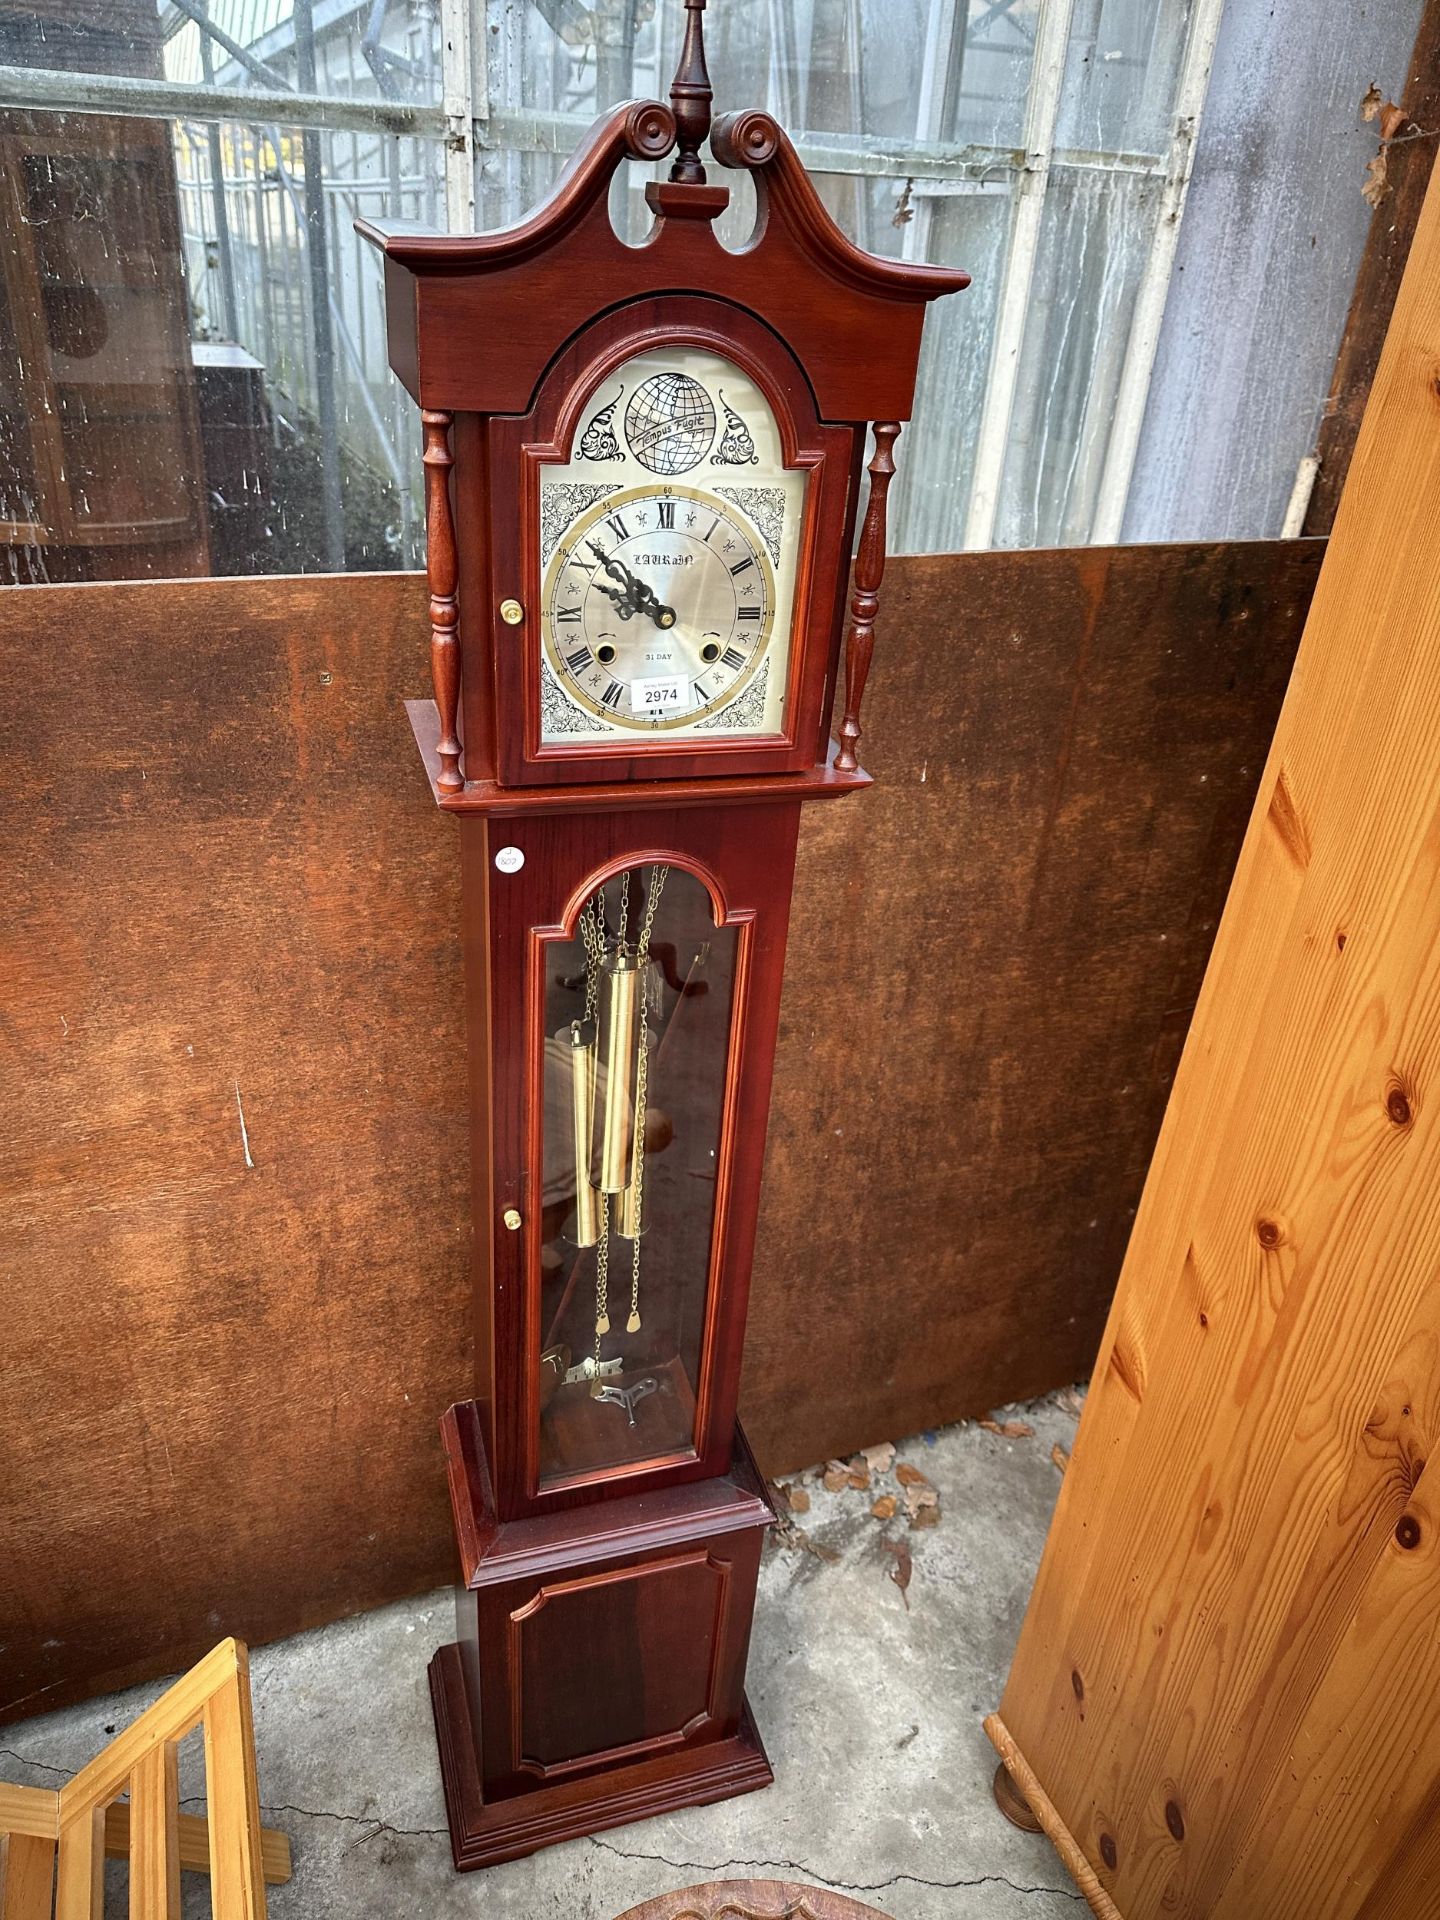 A TEMPUS FUGIT 31 DAY GRANDMOTHER CLOCK WITH GLASS DOOR AND THREE WEIGHTS